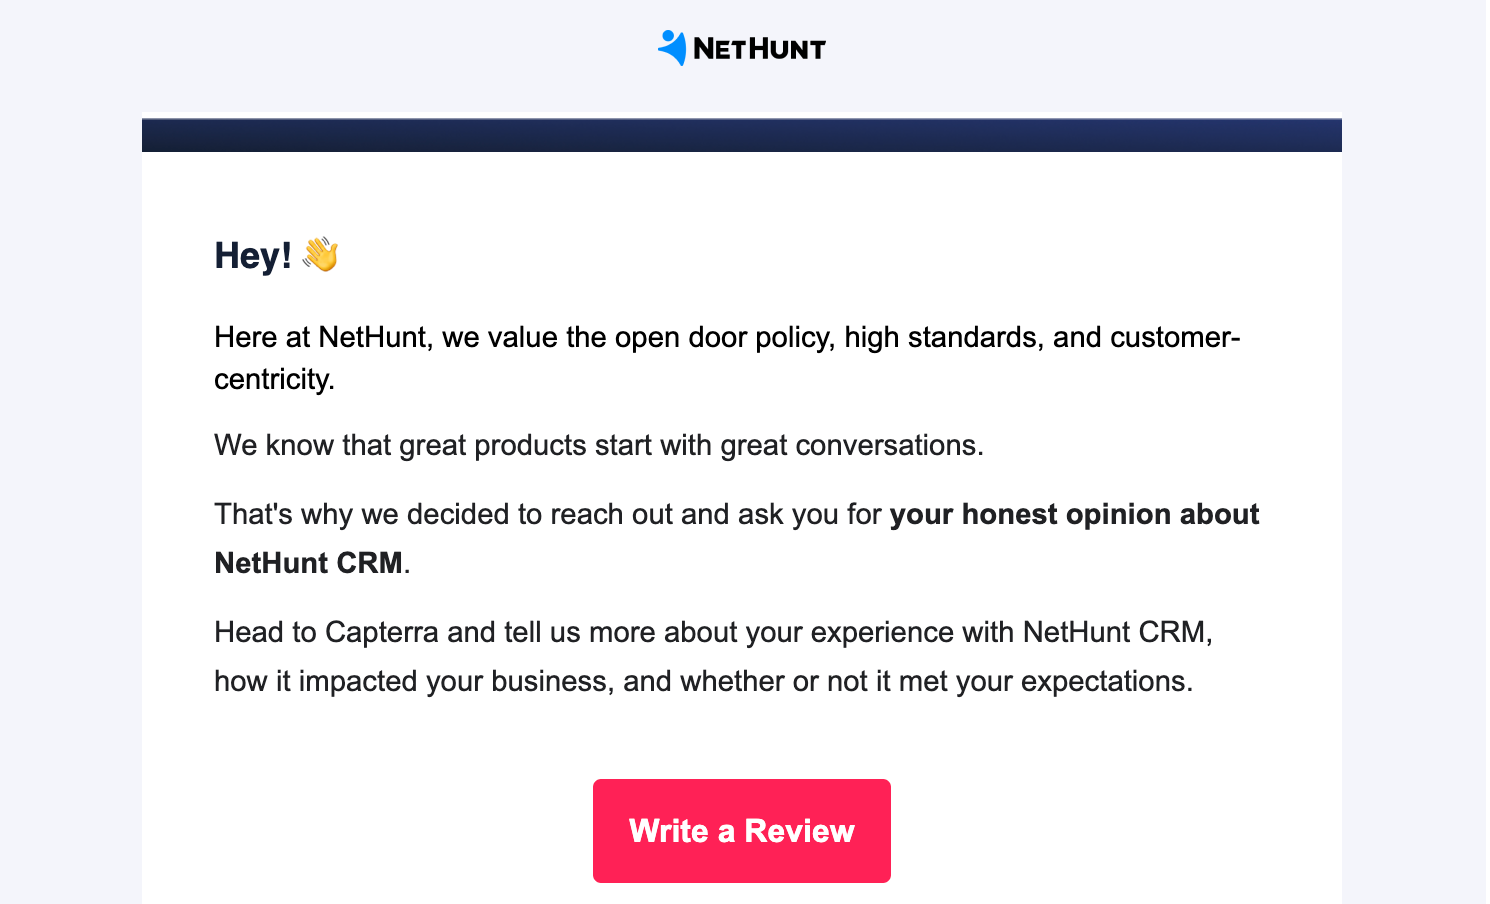 NetHunt CRM Capterra campaign to generate social proof